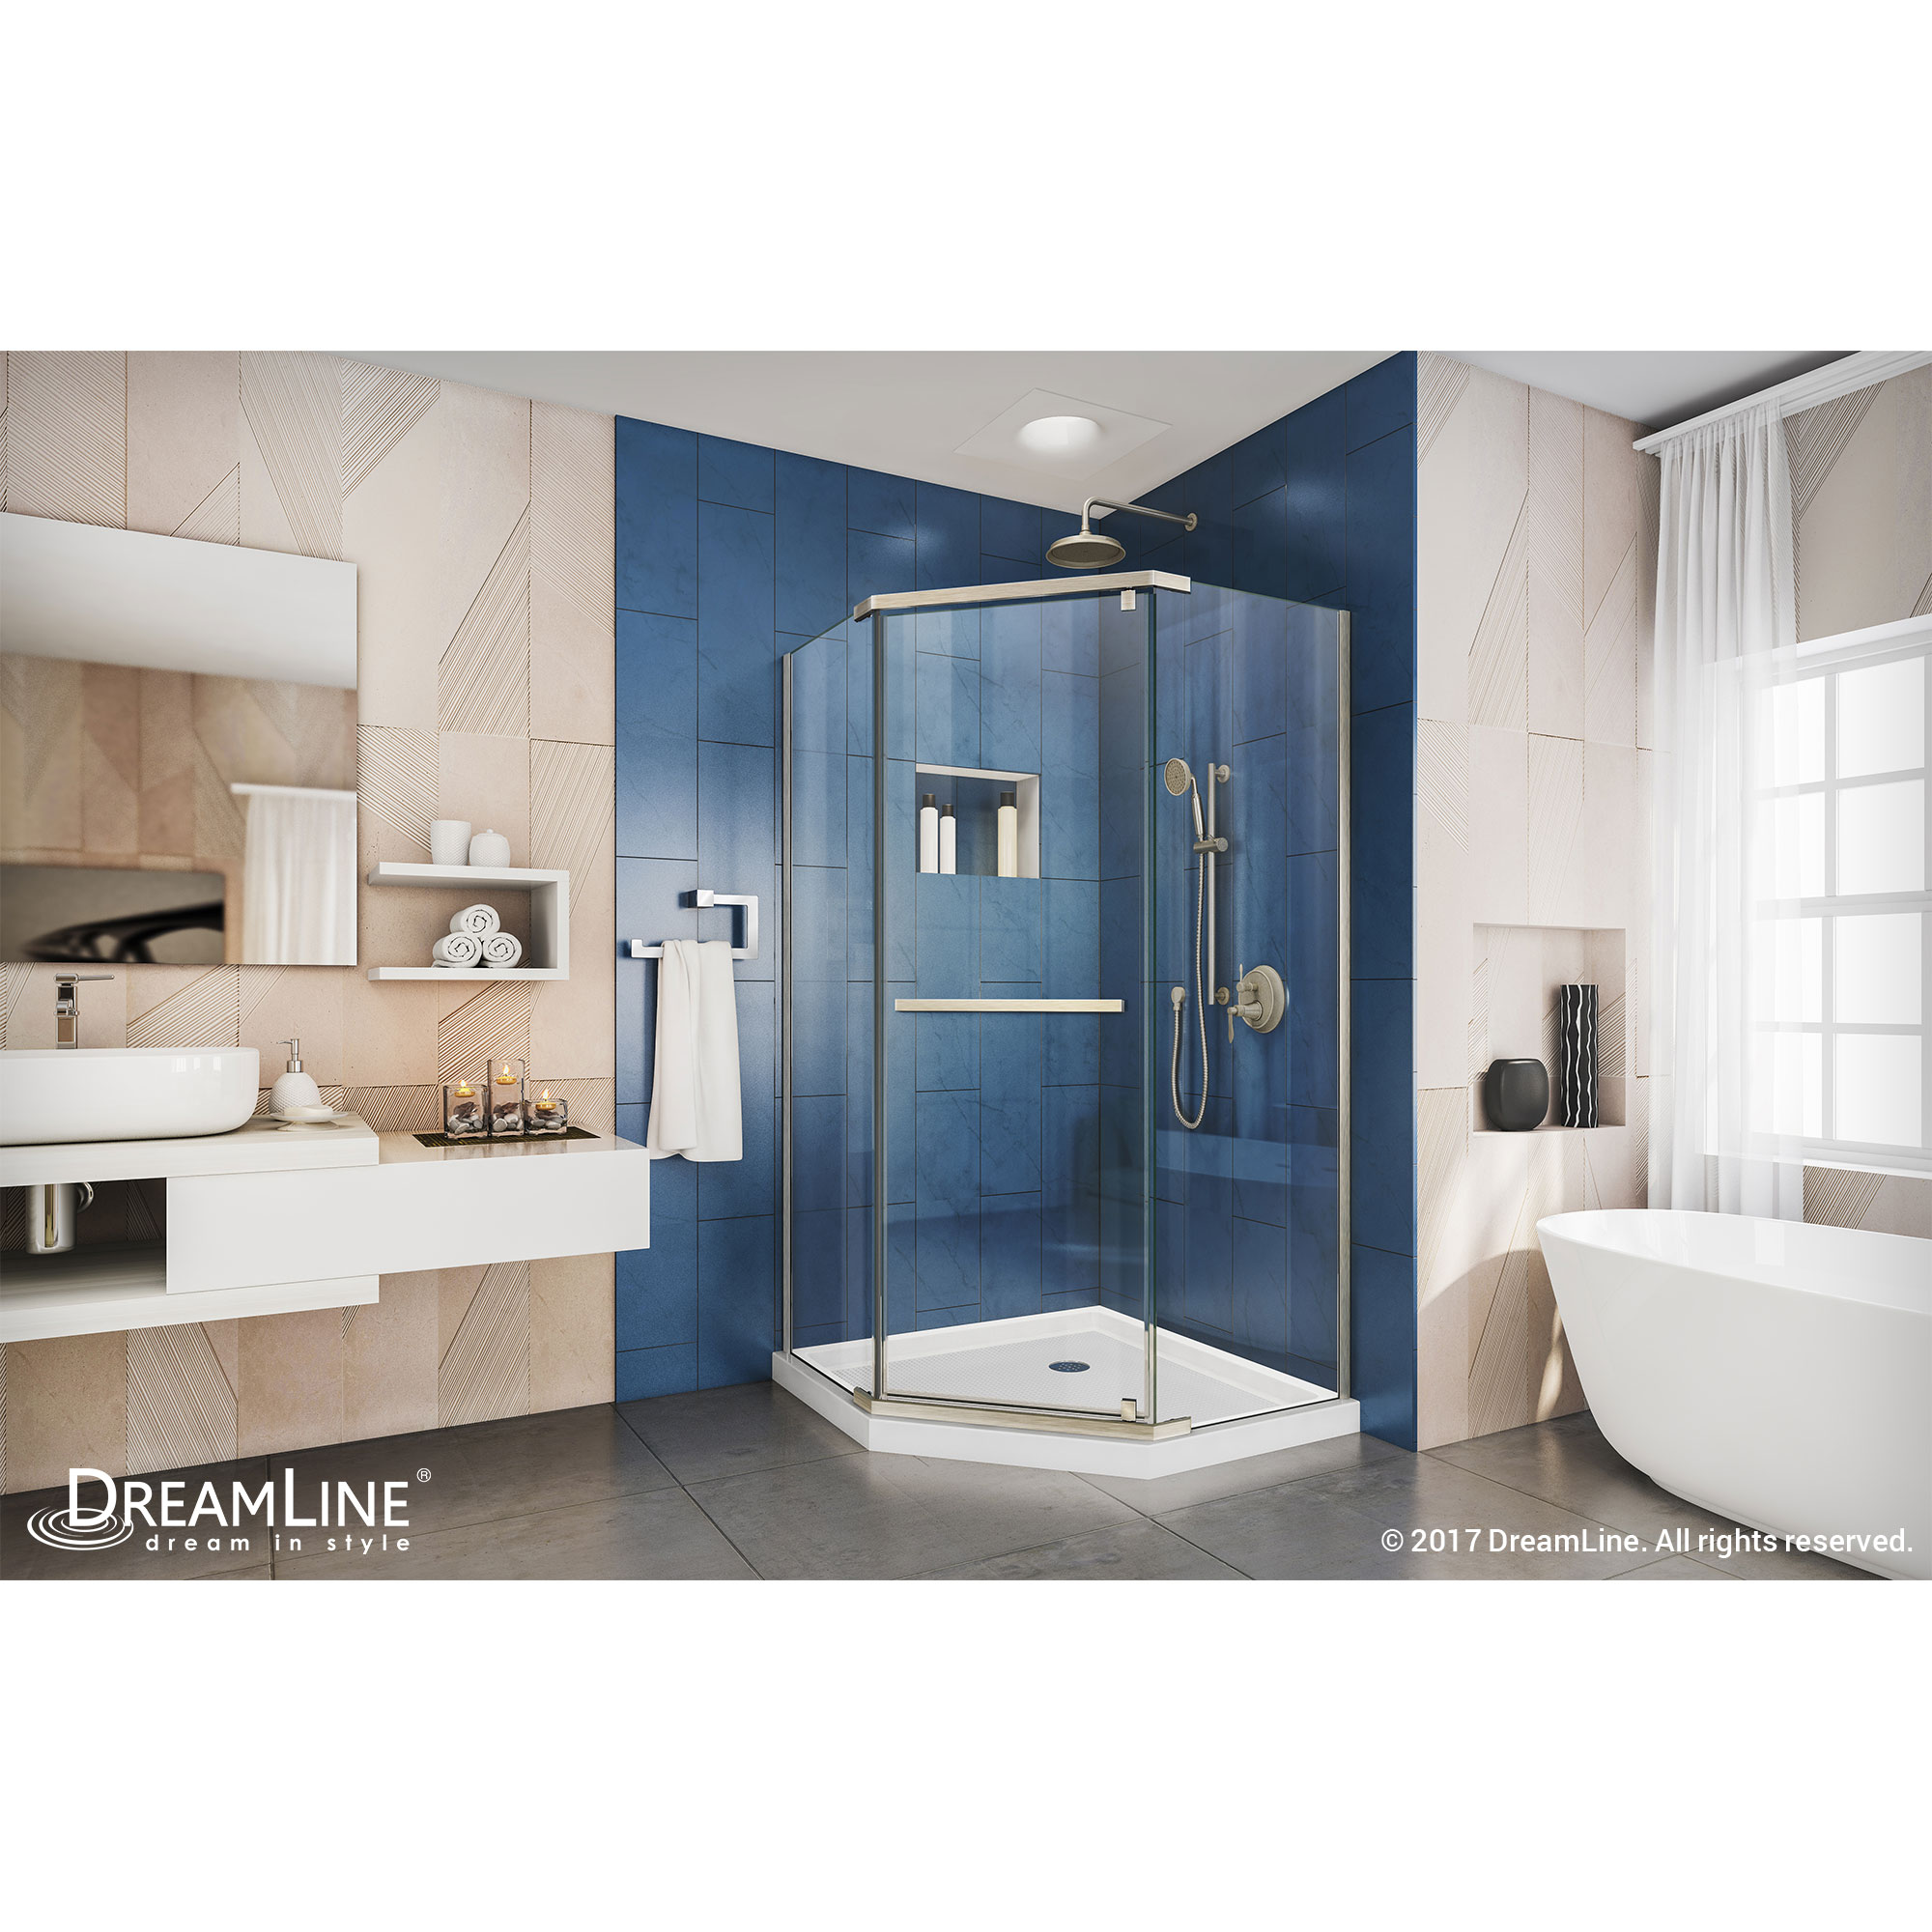 DreamLine Prism 42 in. D x 42 in. W x 74 3/4 H Pivot Shower Enclosure in Brushed Nickel and Corner Drain White Base Kit